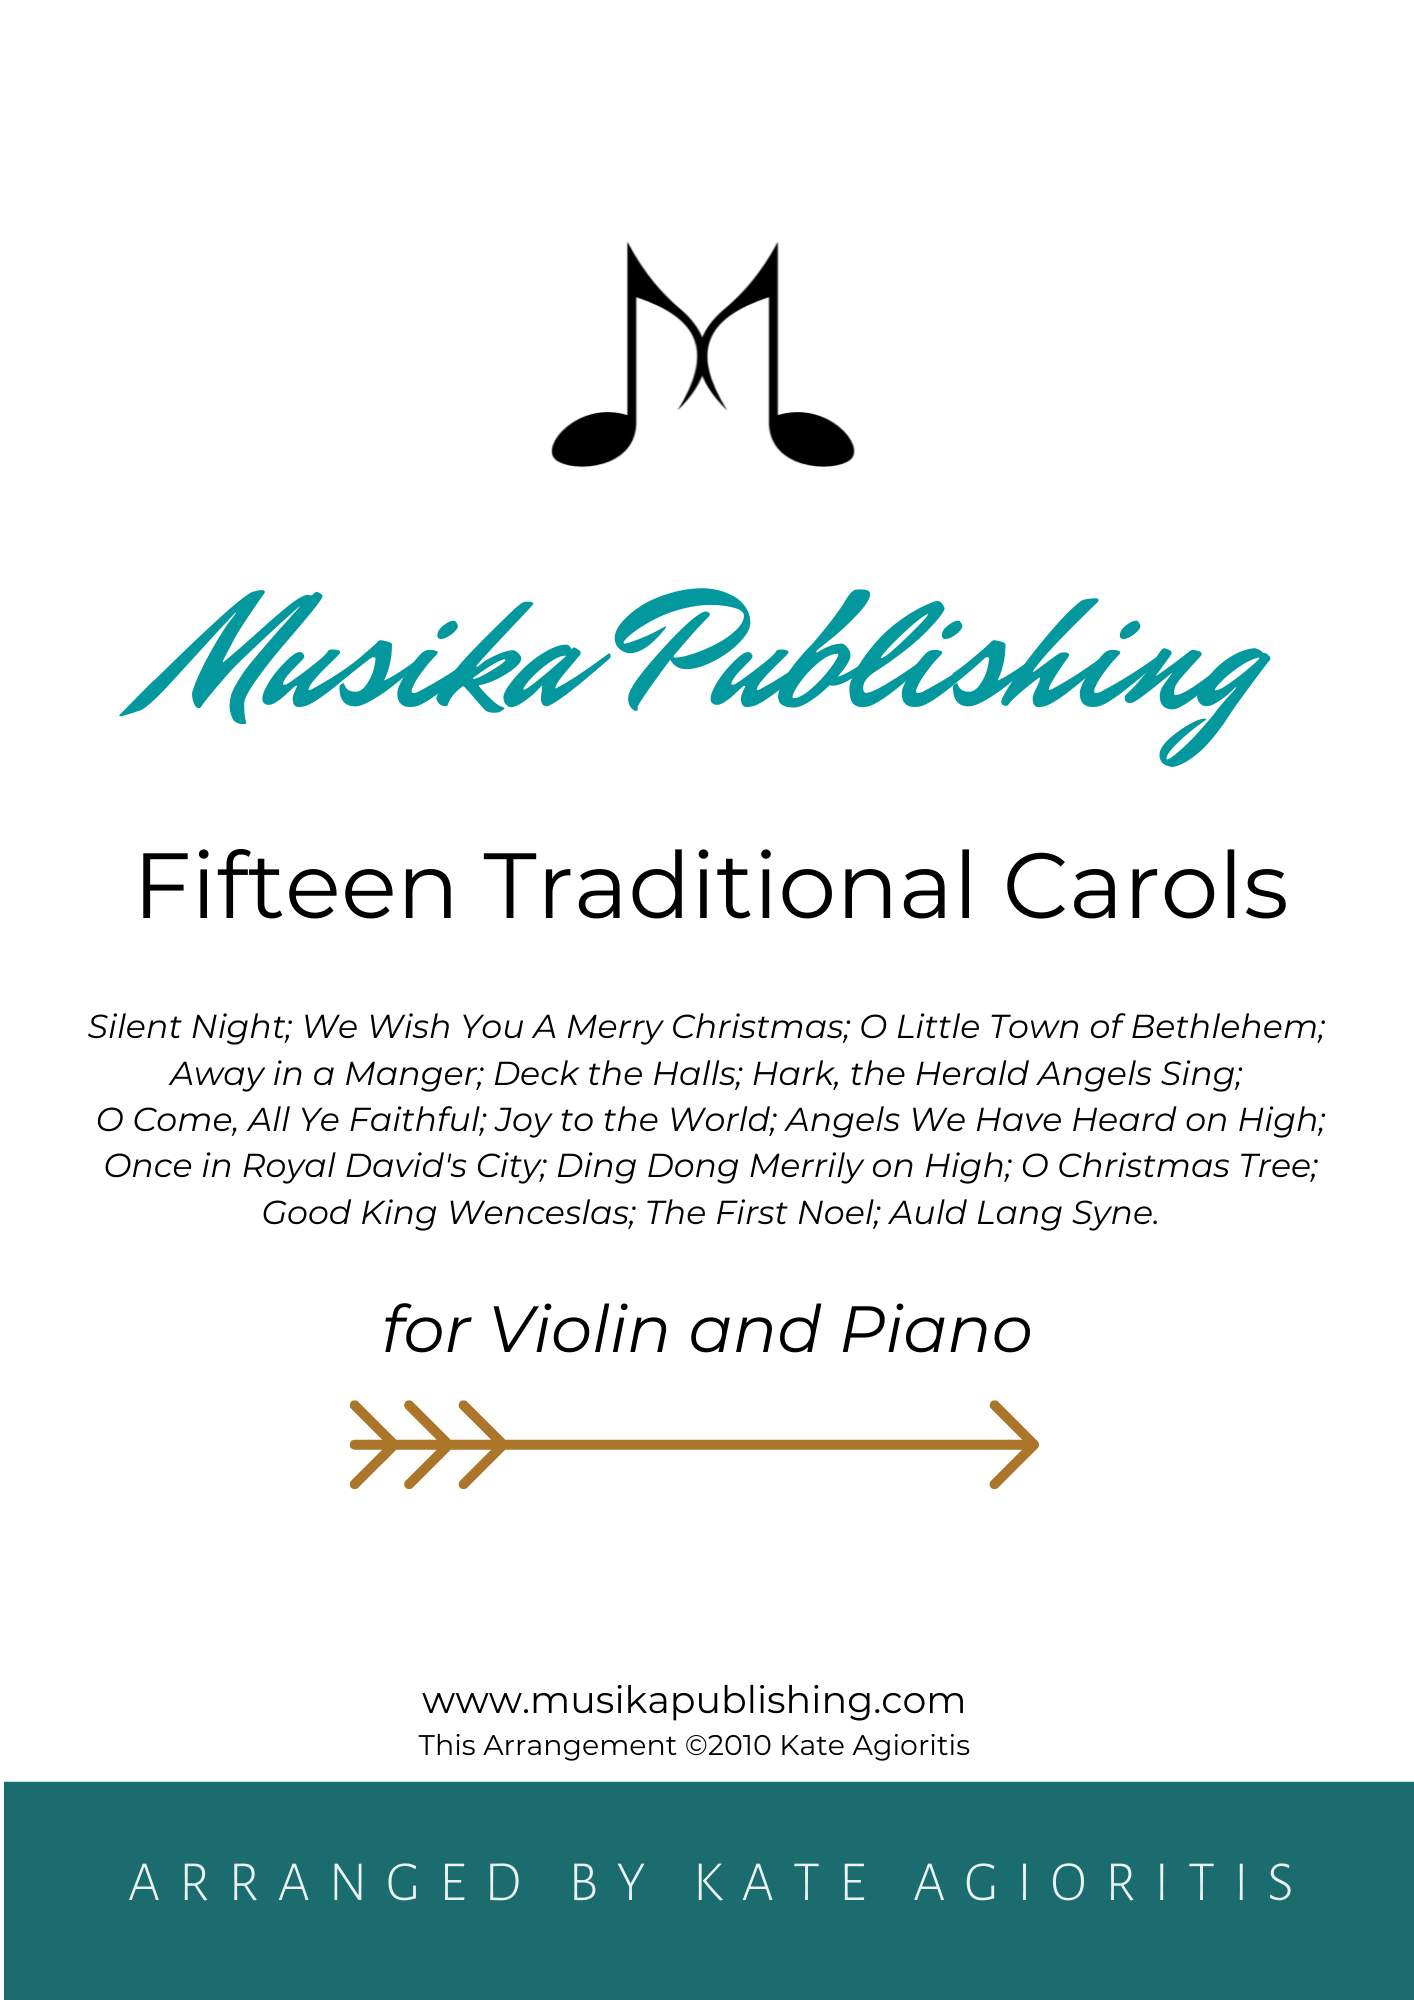 Fifteen Traditional Carols - for Violin and Piano